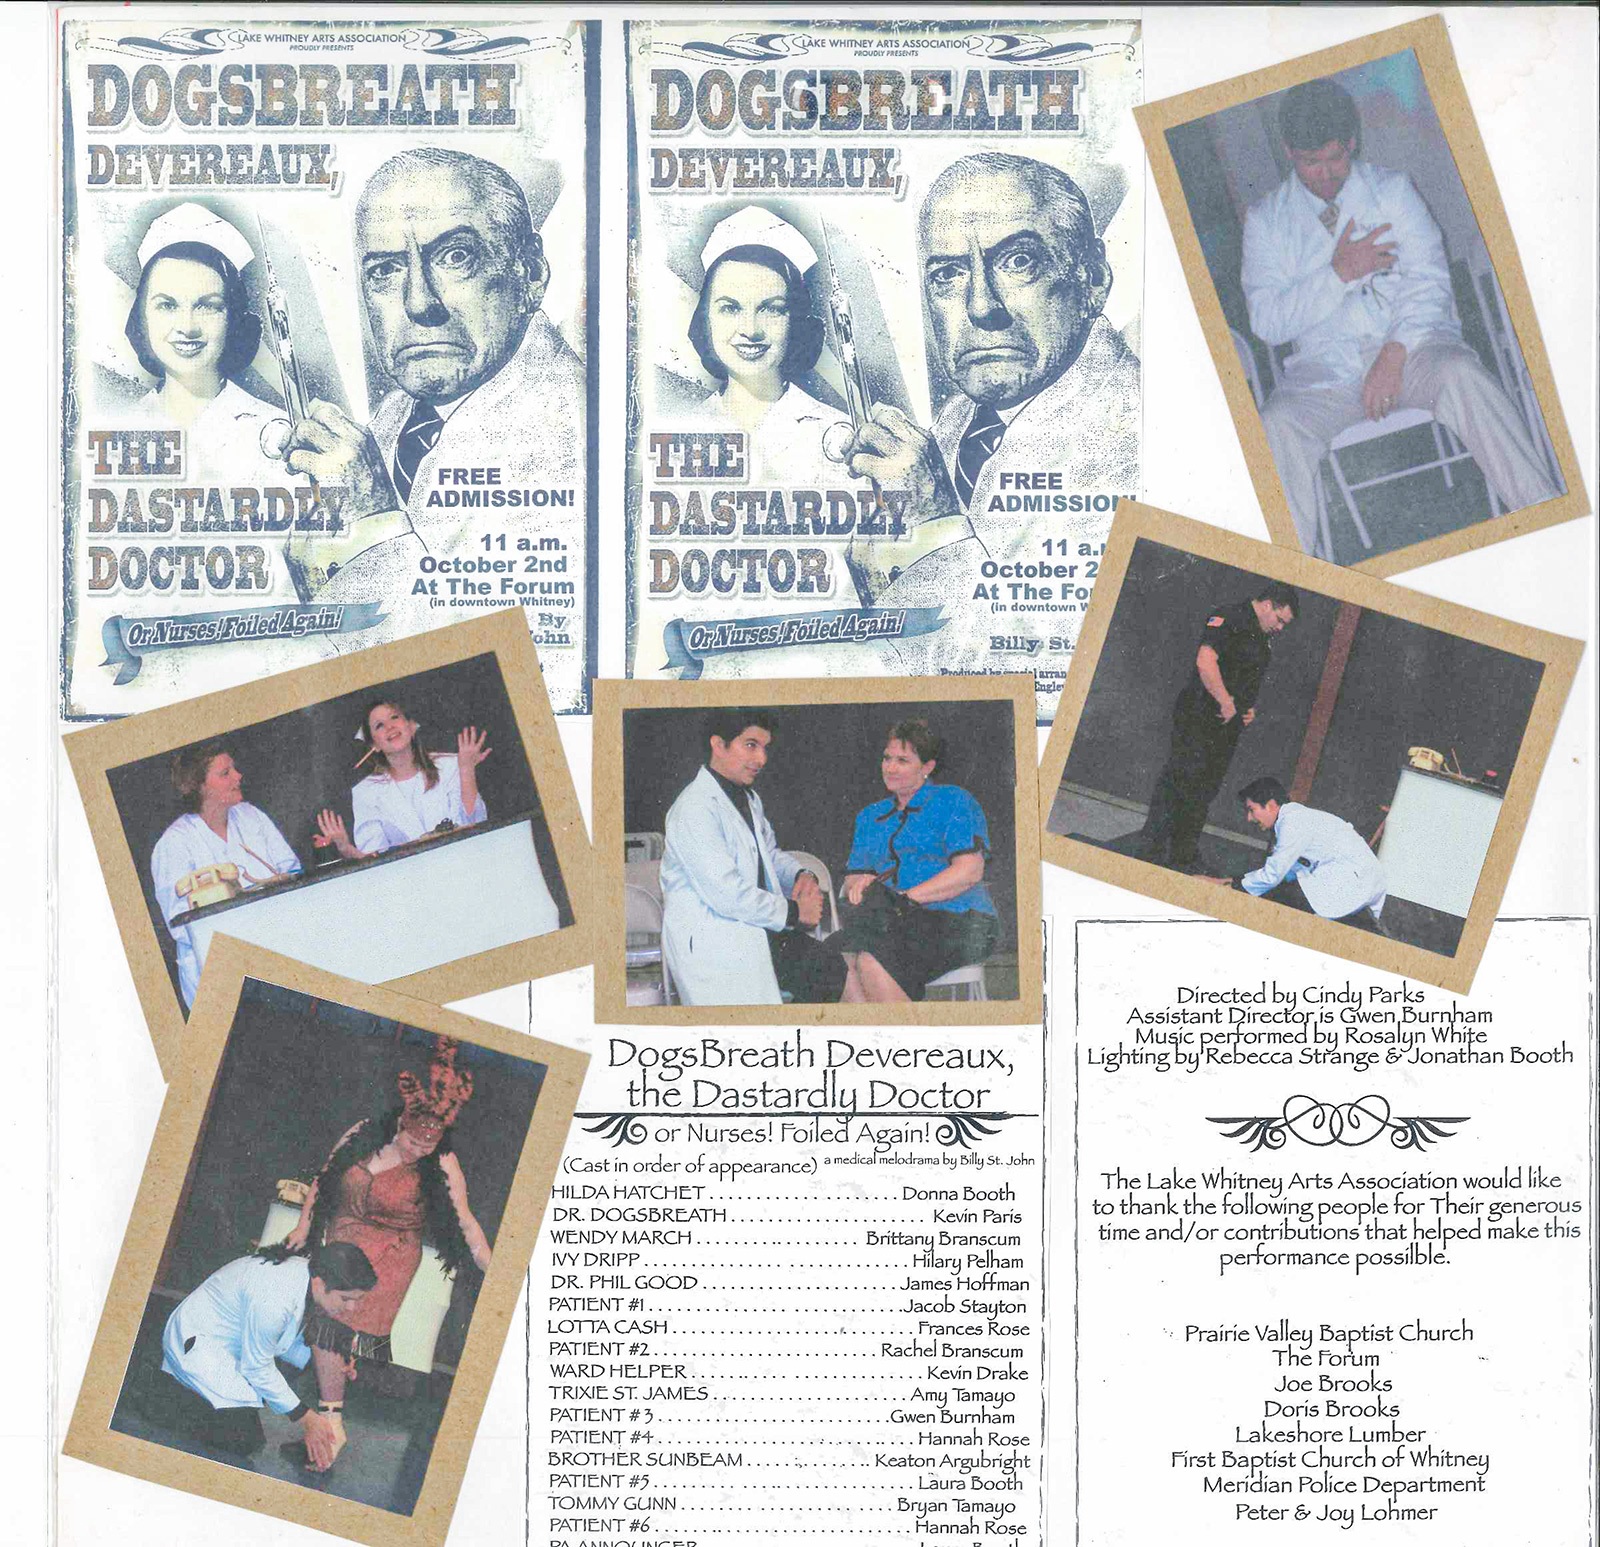 Dogsbreath Devereaux 2004 - Our very first show!